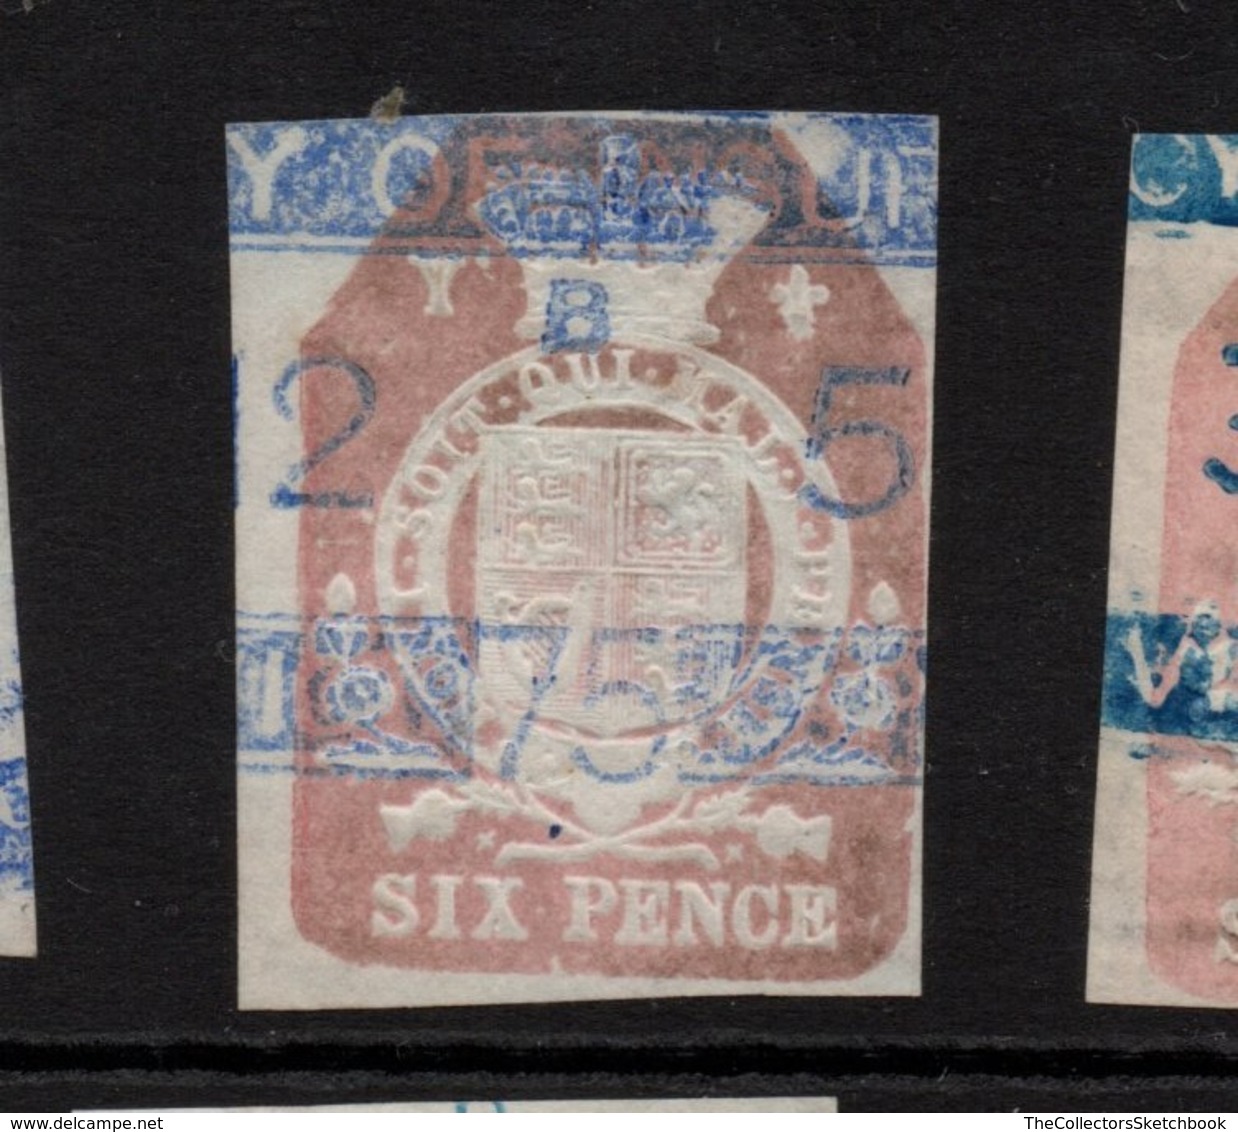 GB Fiscals / Revenues; Scarce General Purpose Imperf.;  6d.  Rose. Good Used. - Fiscaux